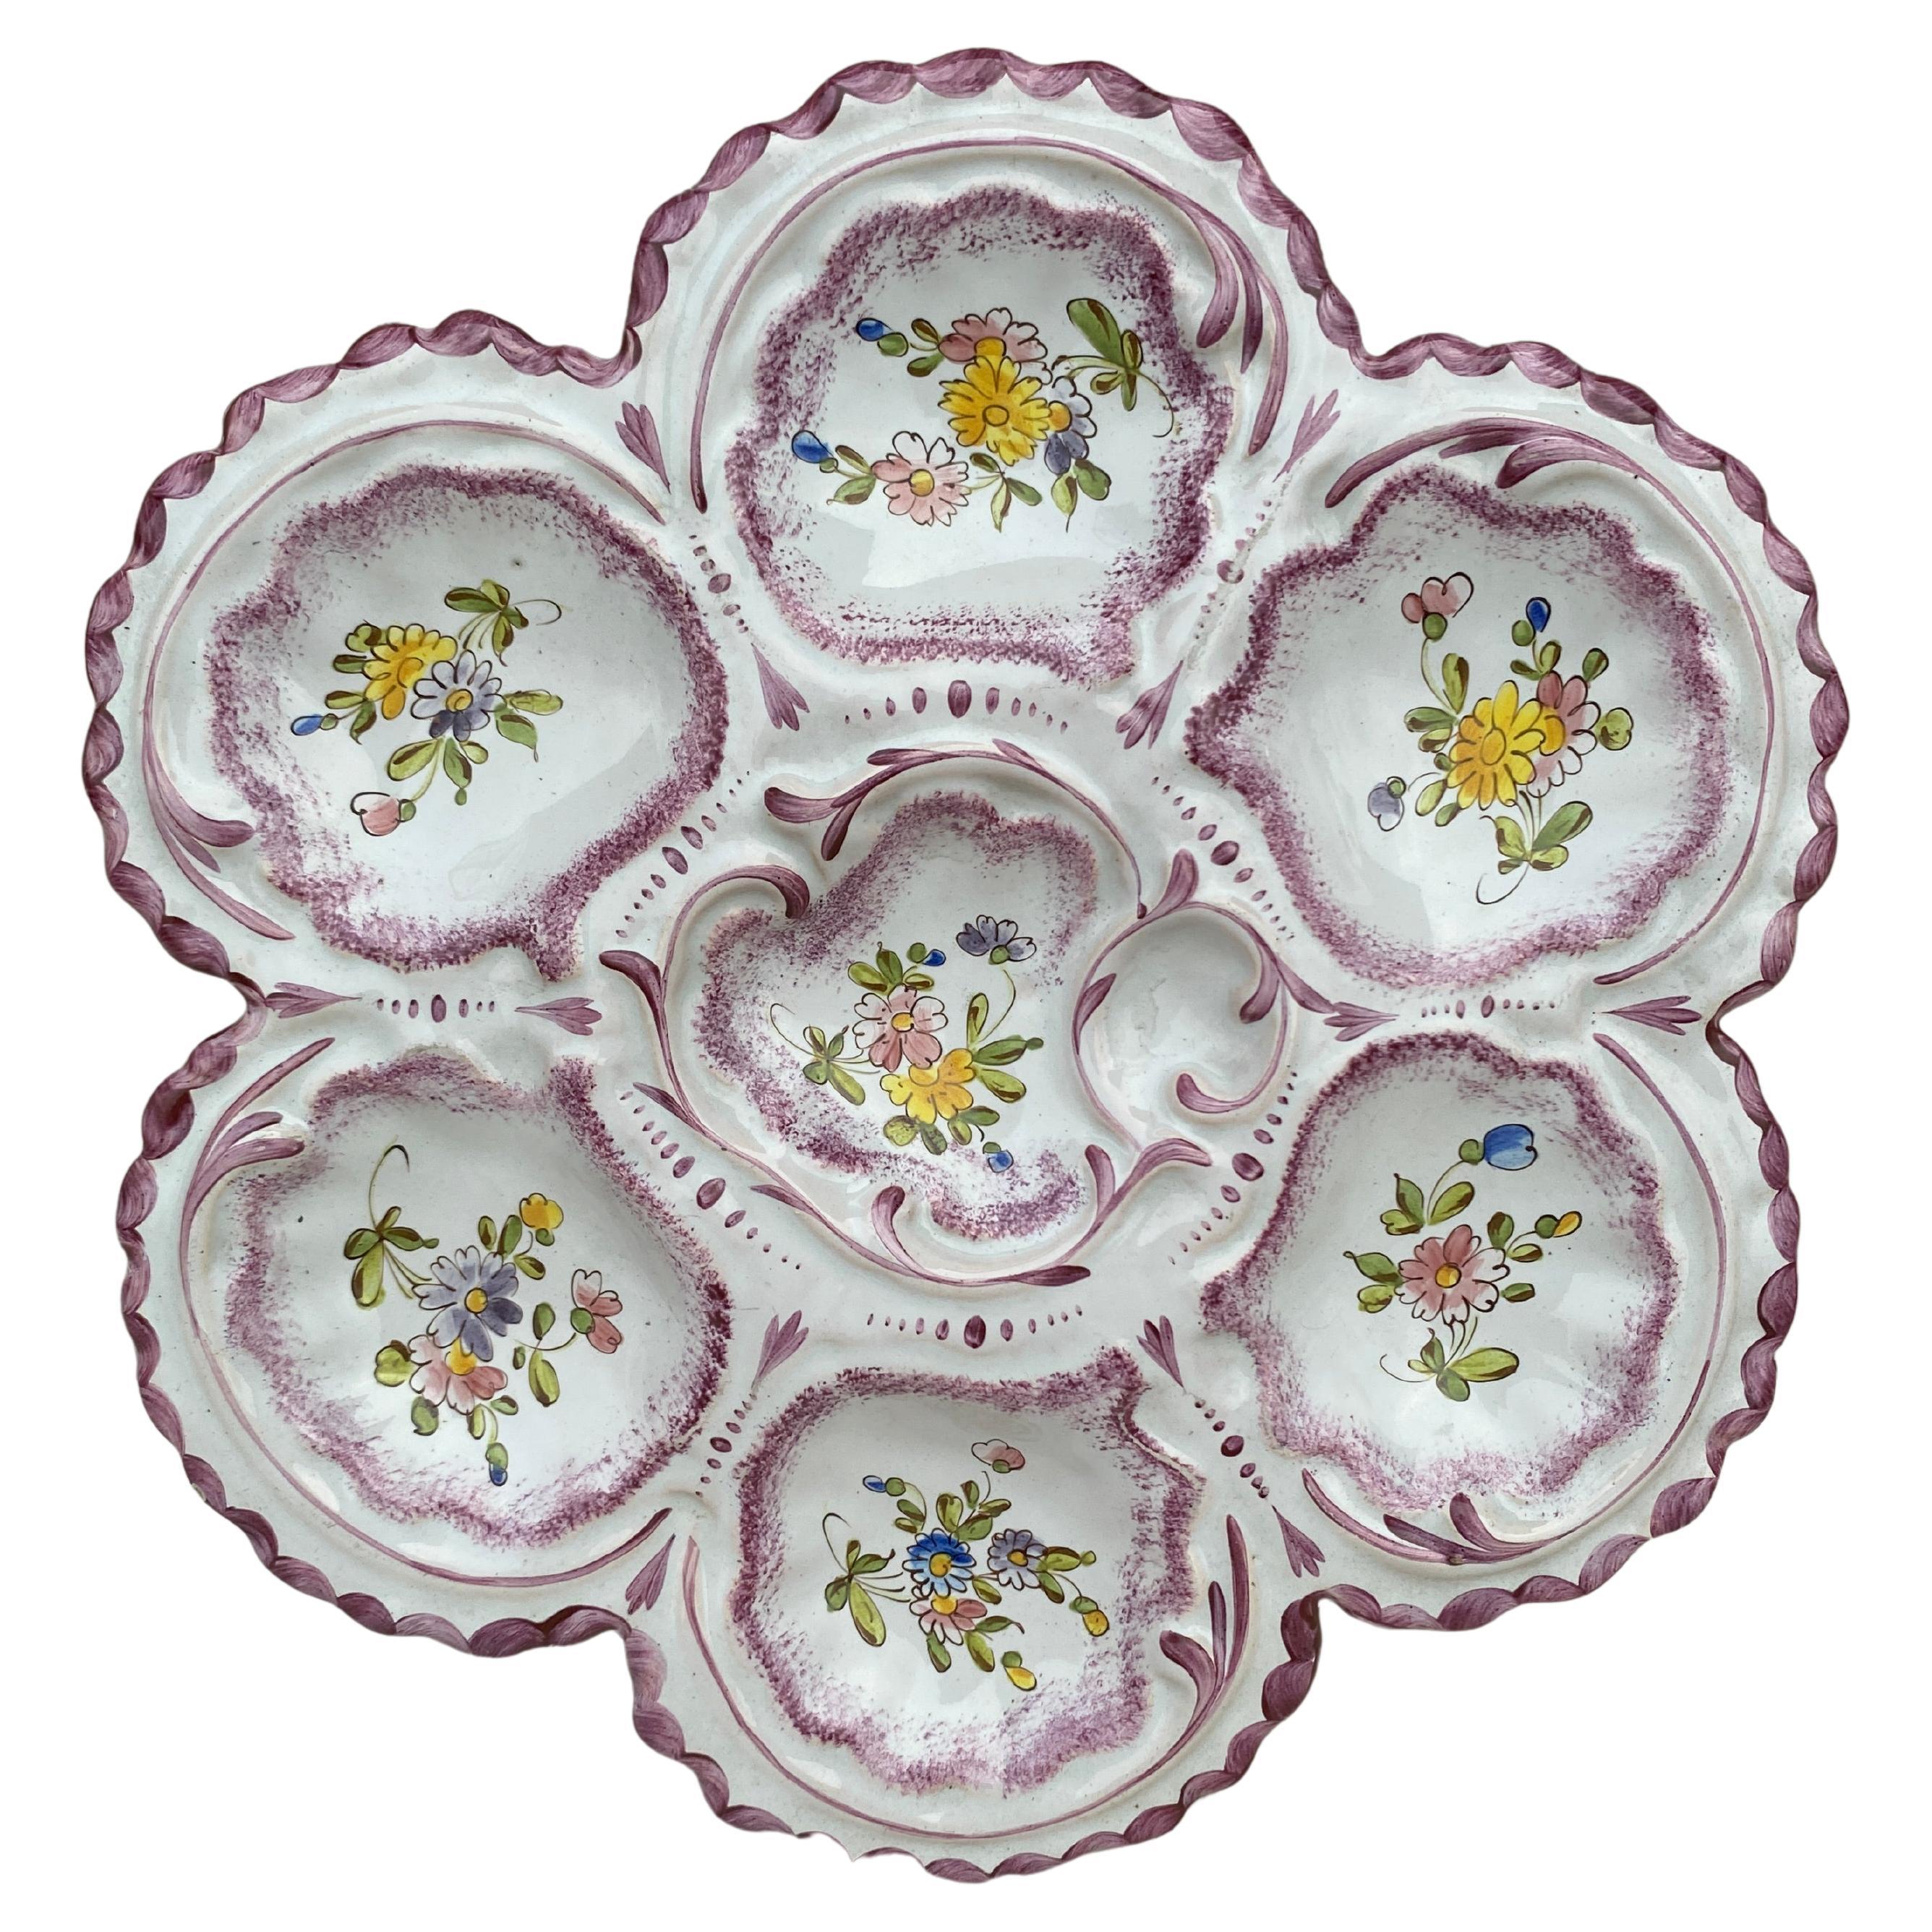 French, Faience Oyster Plate Alfred Renoleau Angouleme